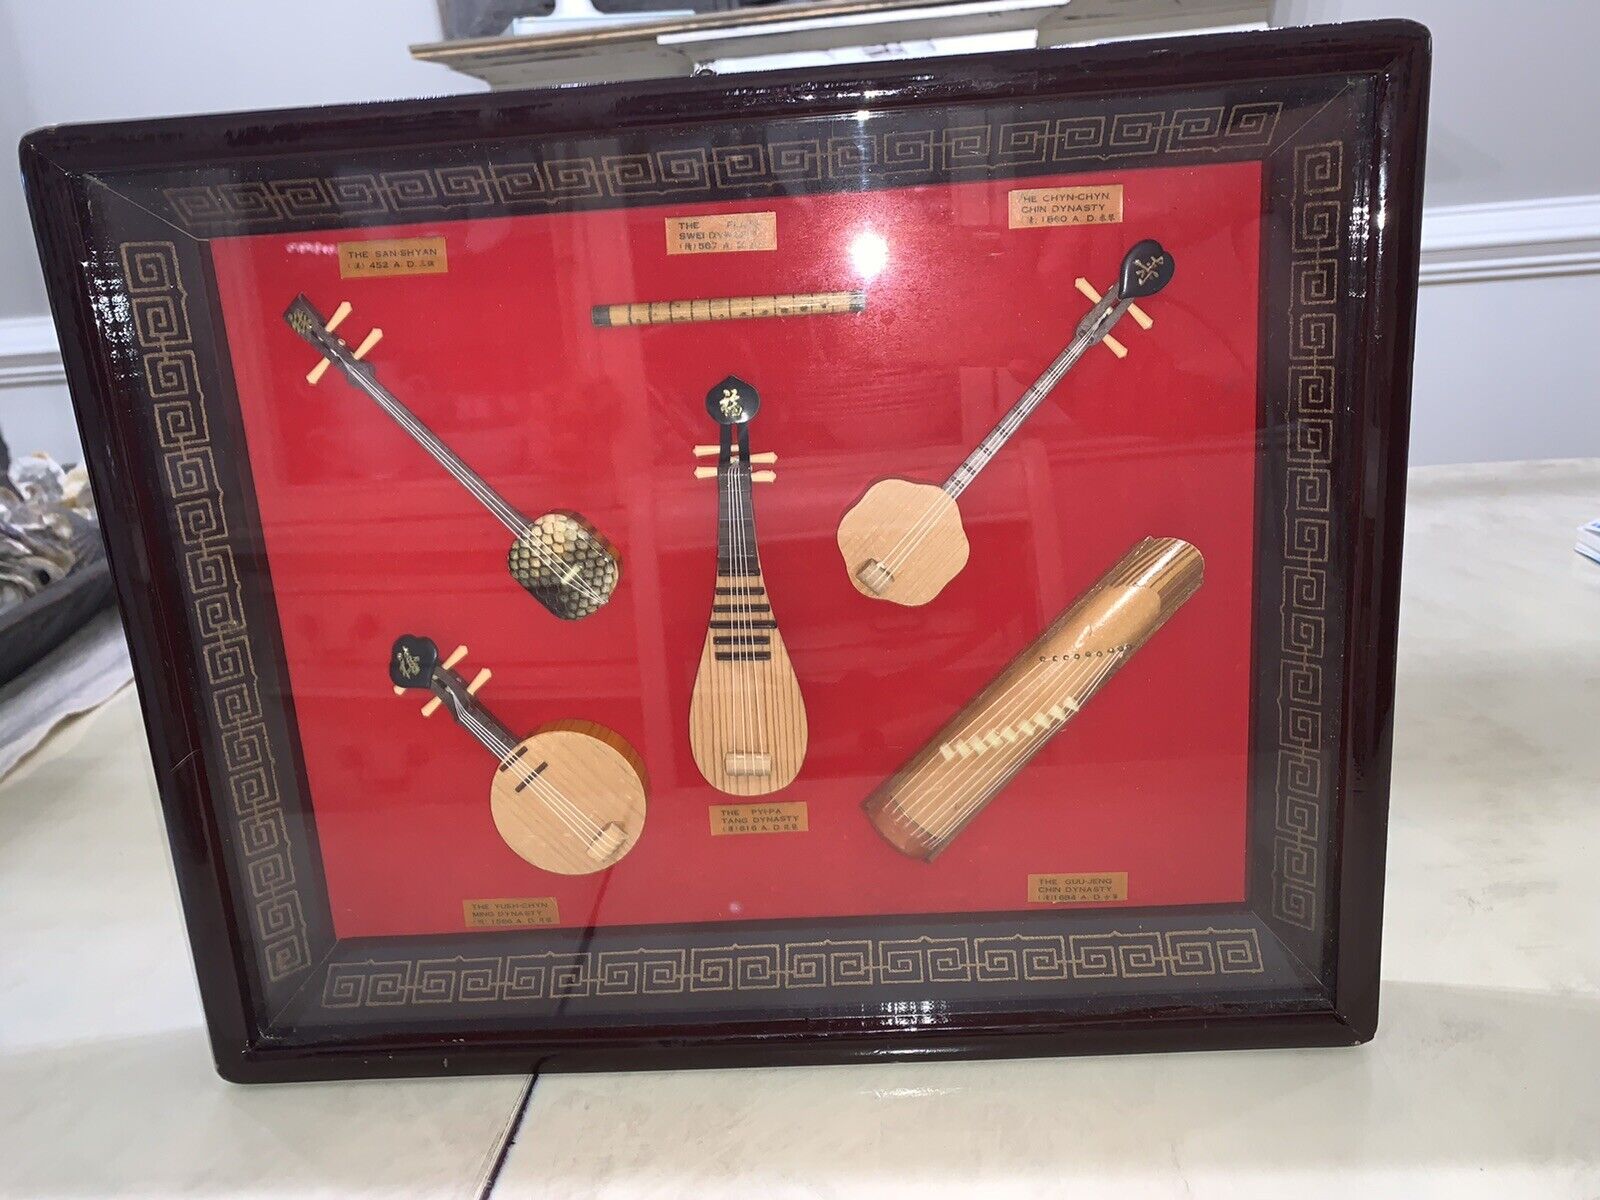 Vintage Chinese Dynasty  Minature Musical Instruments In shadow box Art